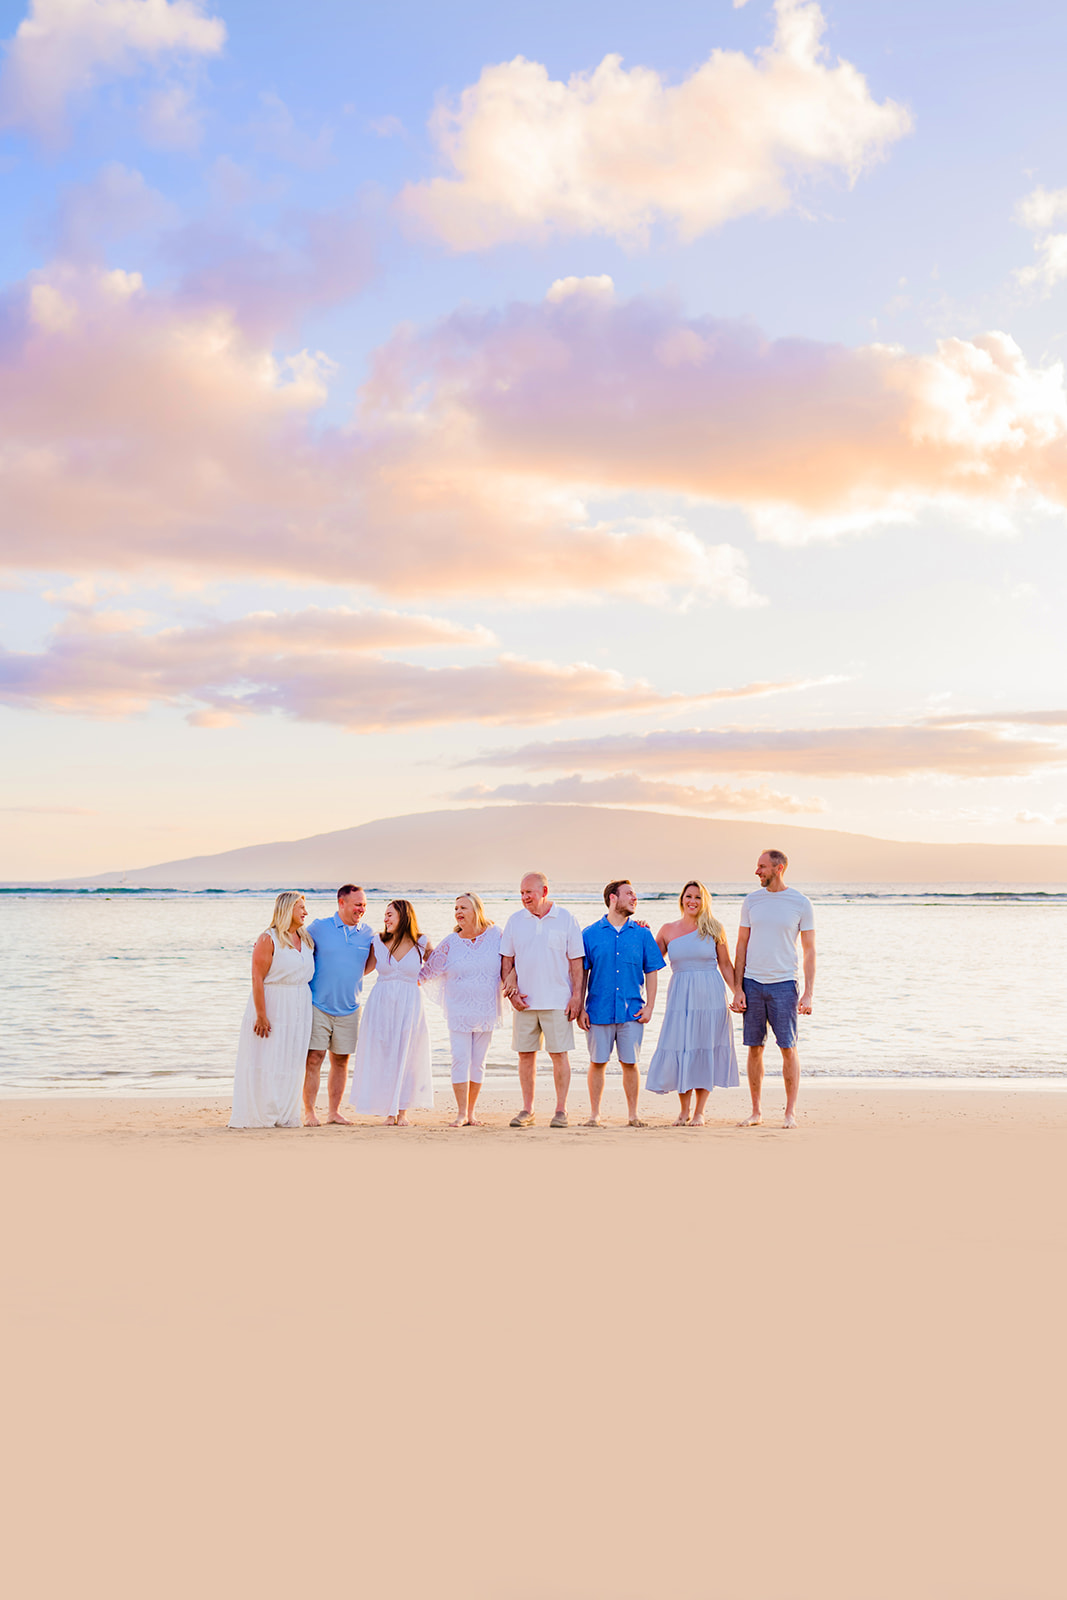 A large family wearing white and blue stand together on the beach during family photos at Sunset on Maui.